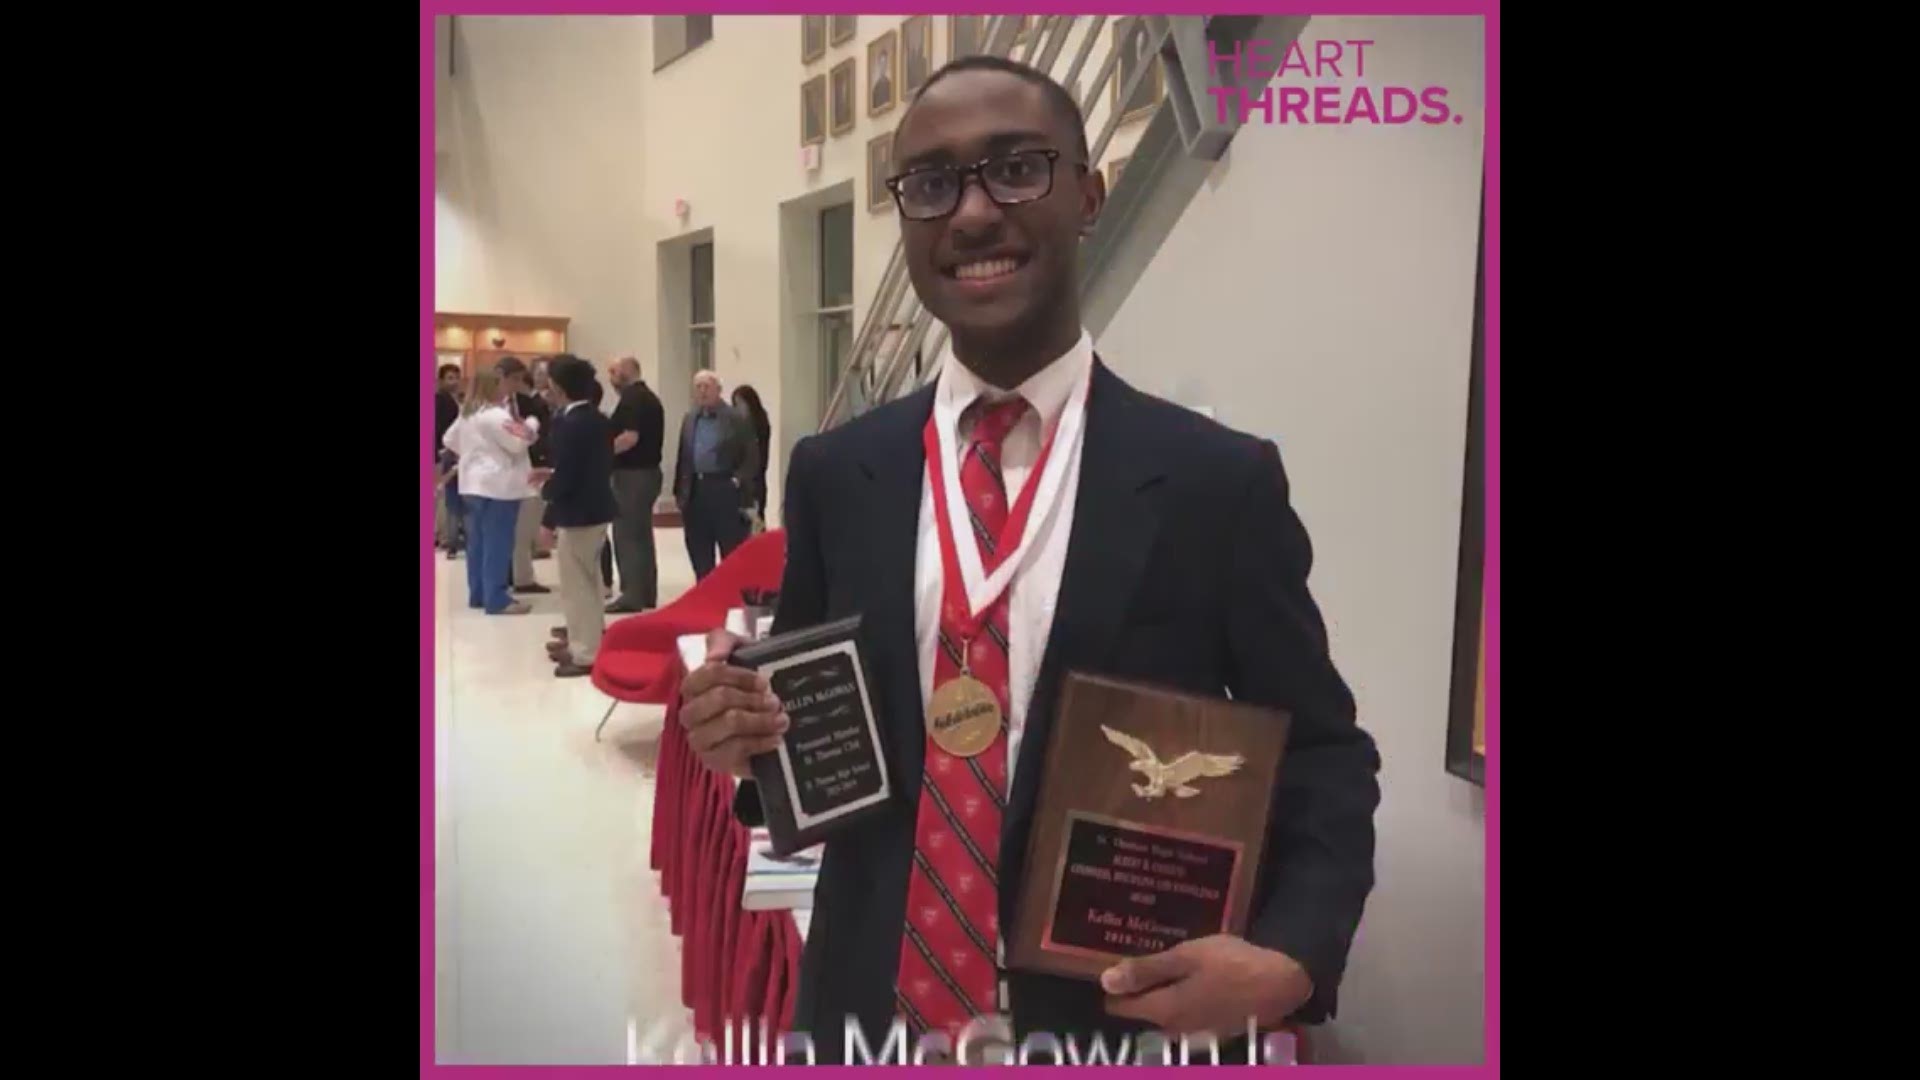 With a 4.57 GPA, Kellin became the first black valedictorian in his school's 119-year history. Now he's hoping to be an inspiration to others.